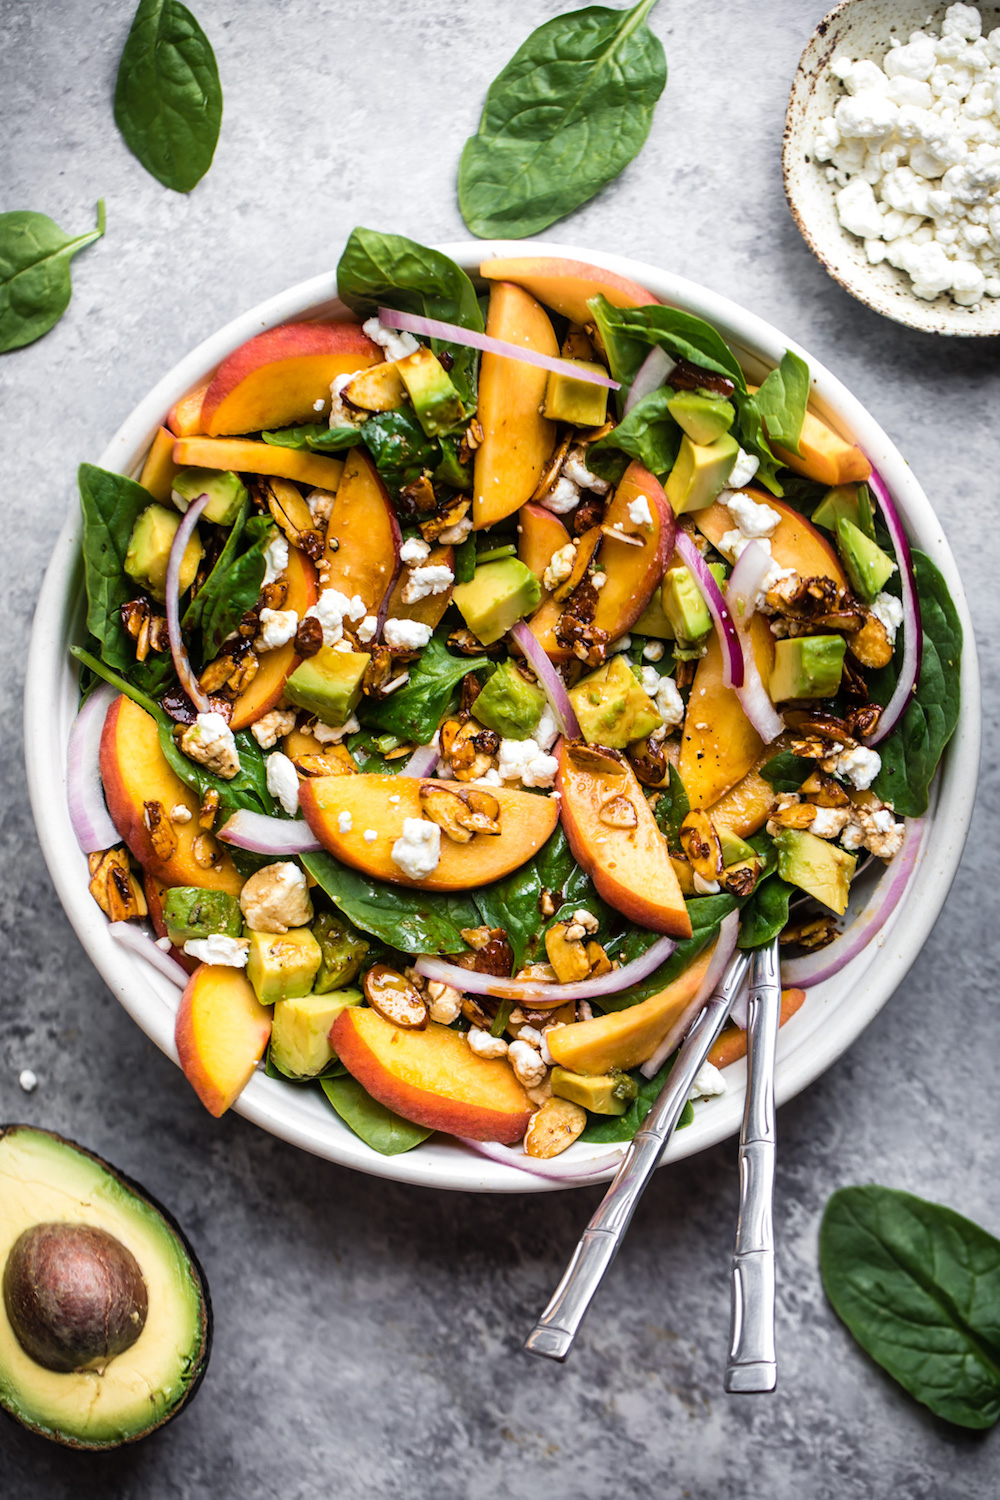 Summer Peach Spinach Salad With Avocado, Toasted Almonds + Goat Cheese 